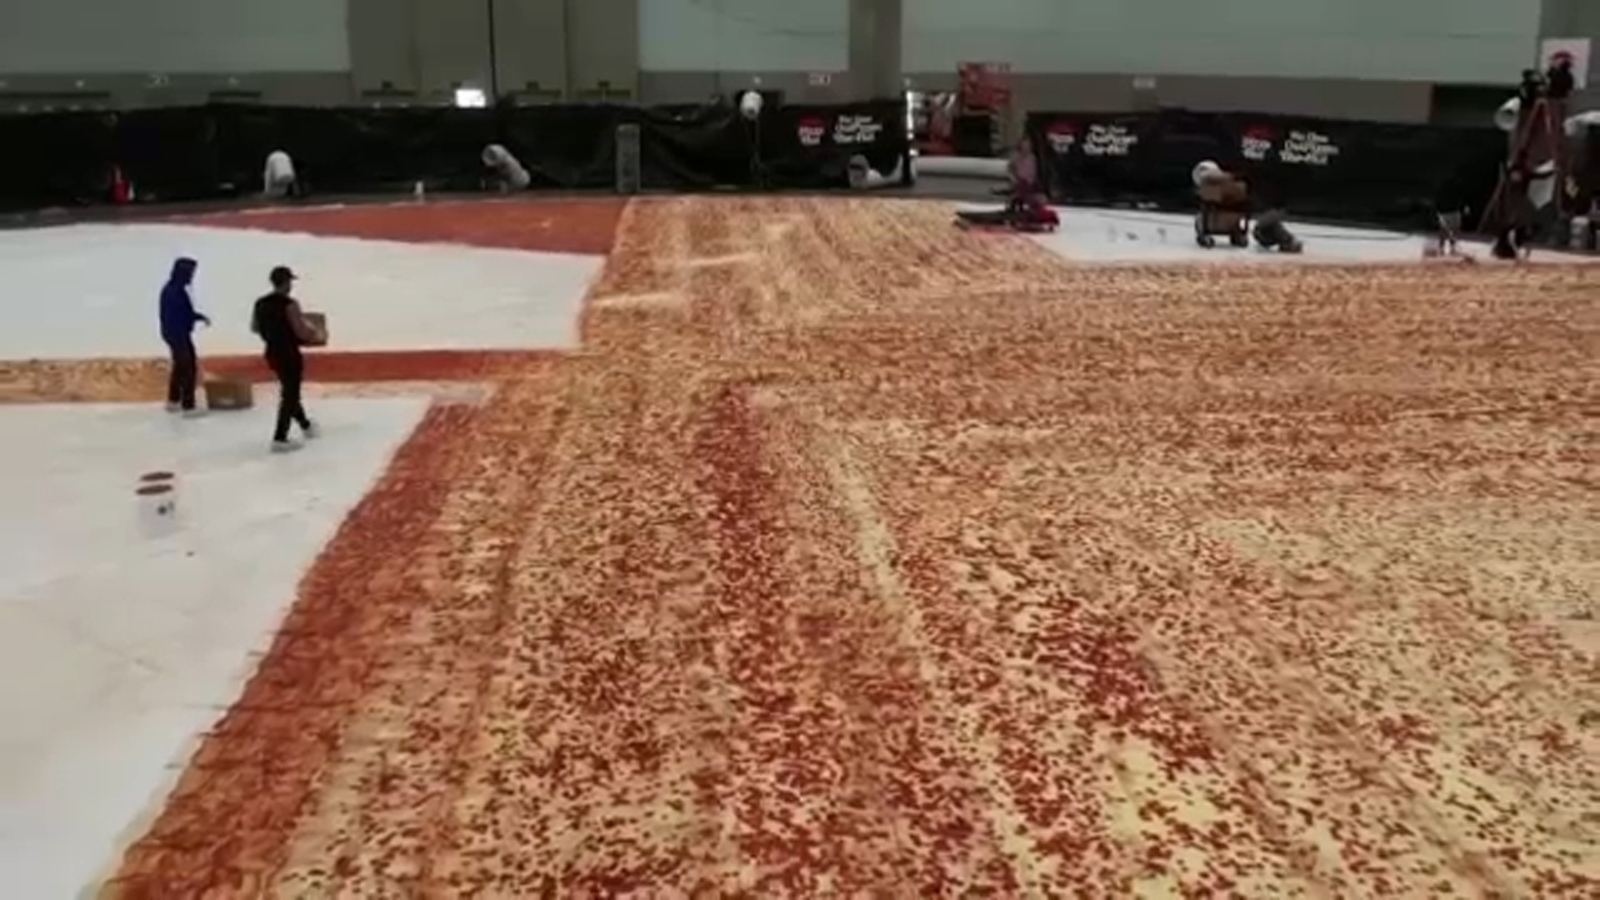 Pizza Hut creates 14,000-square-foot ‘Big New Yorker’ pie to break record for world’s largest pizza